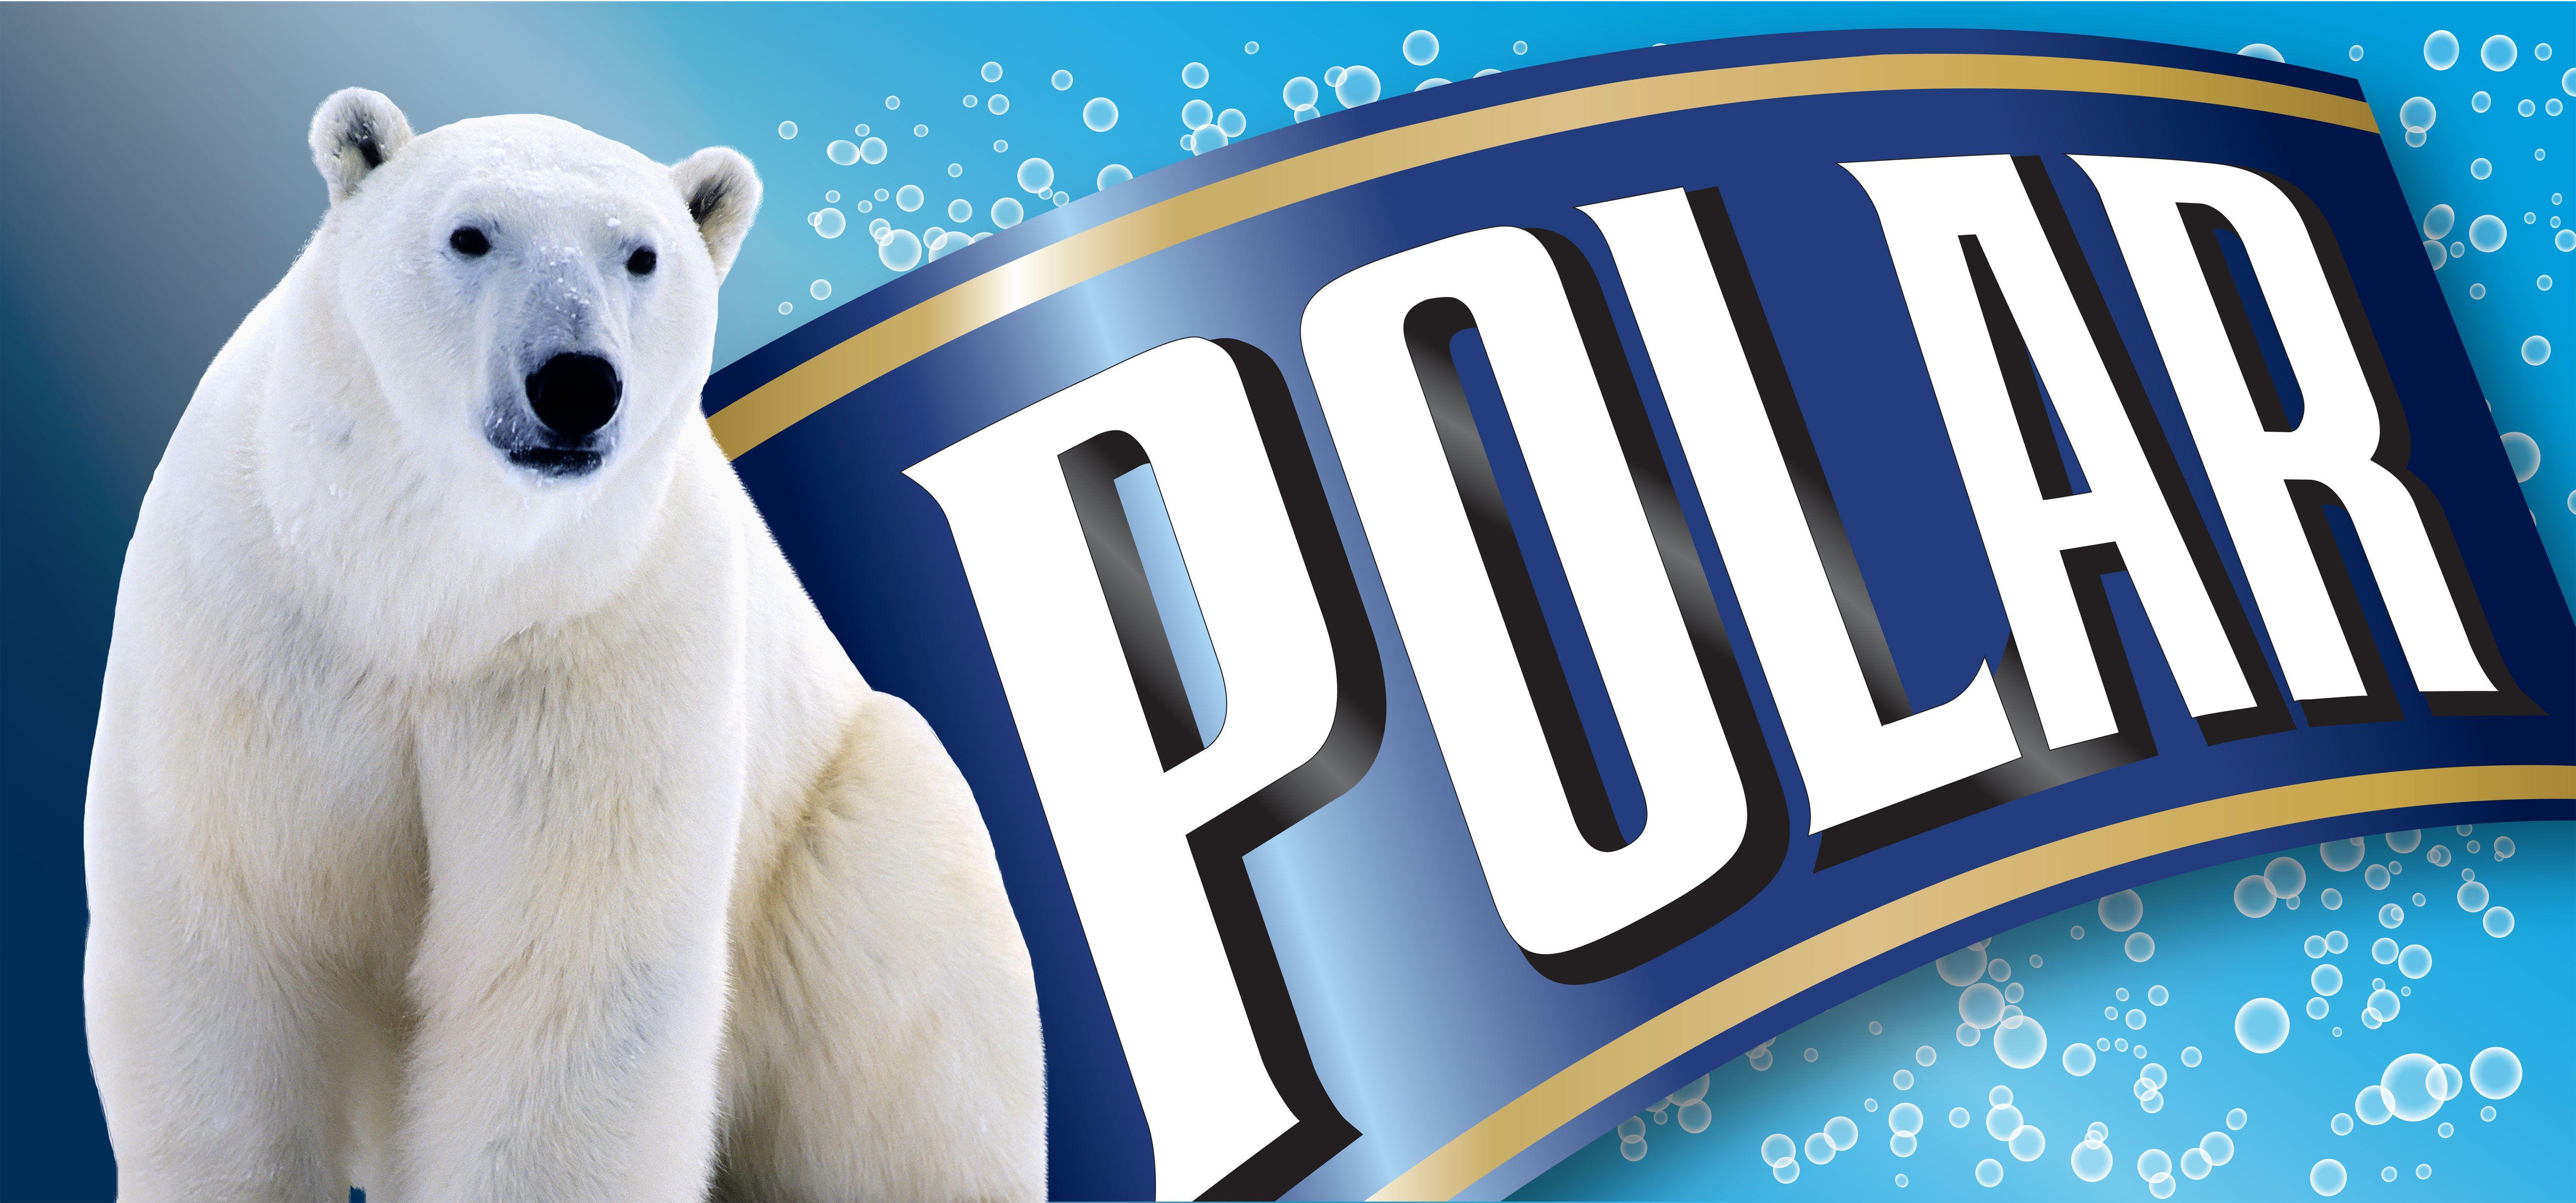 Polar Spring Water Logo - Polar Beverages: Seltzers, Mixers, Soft Drinks & Spring Water